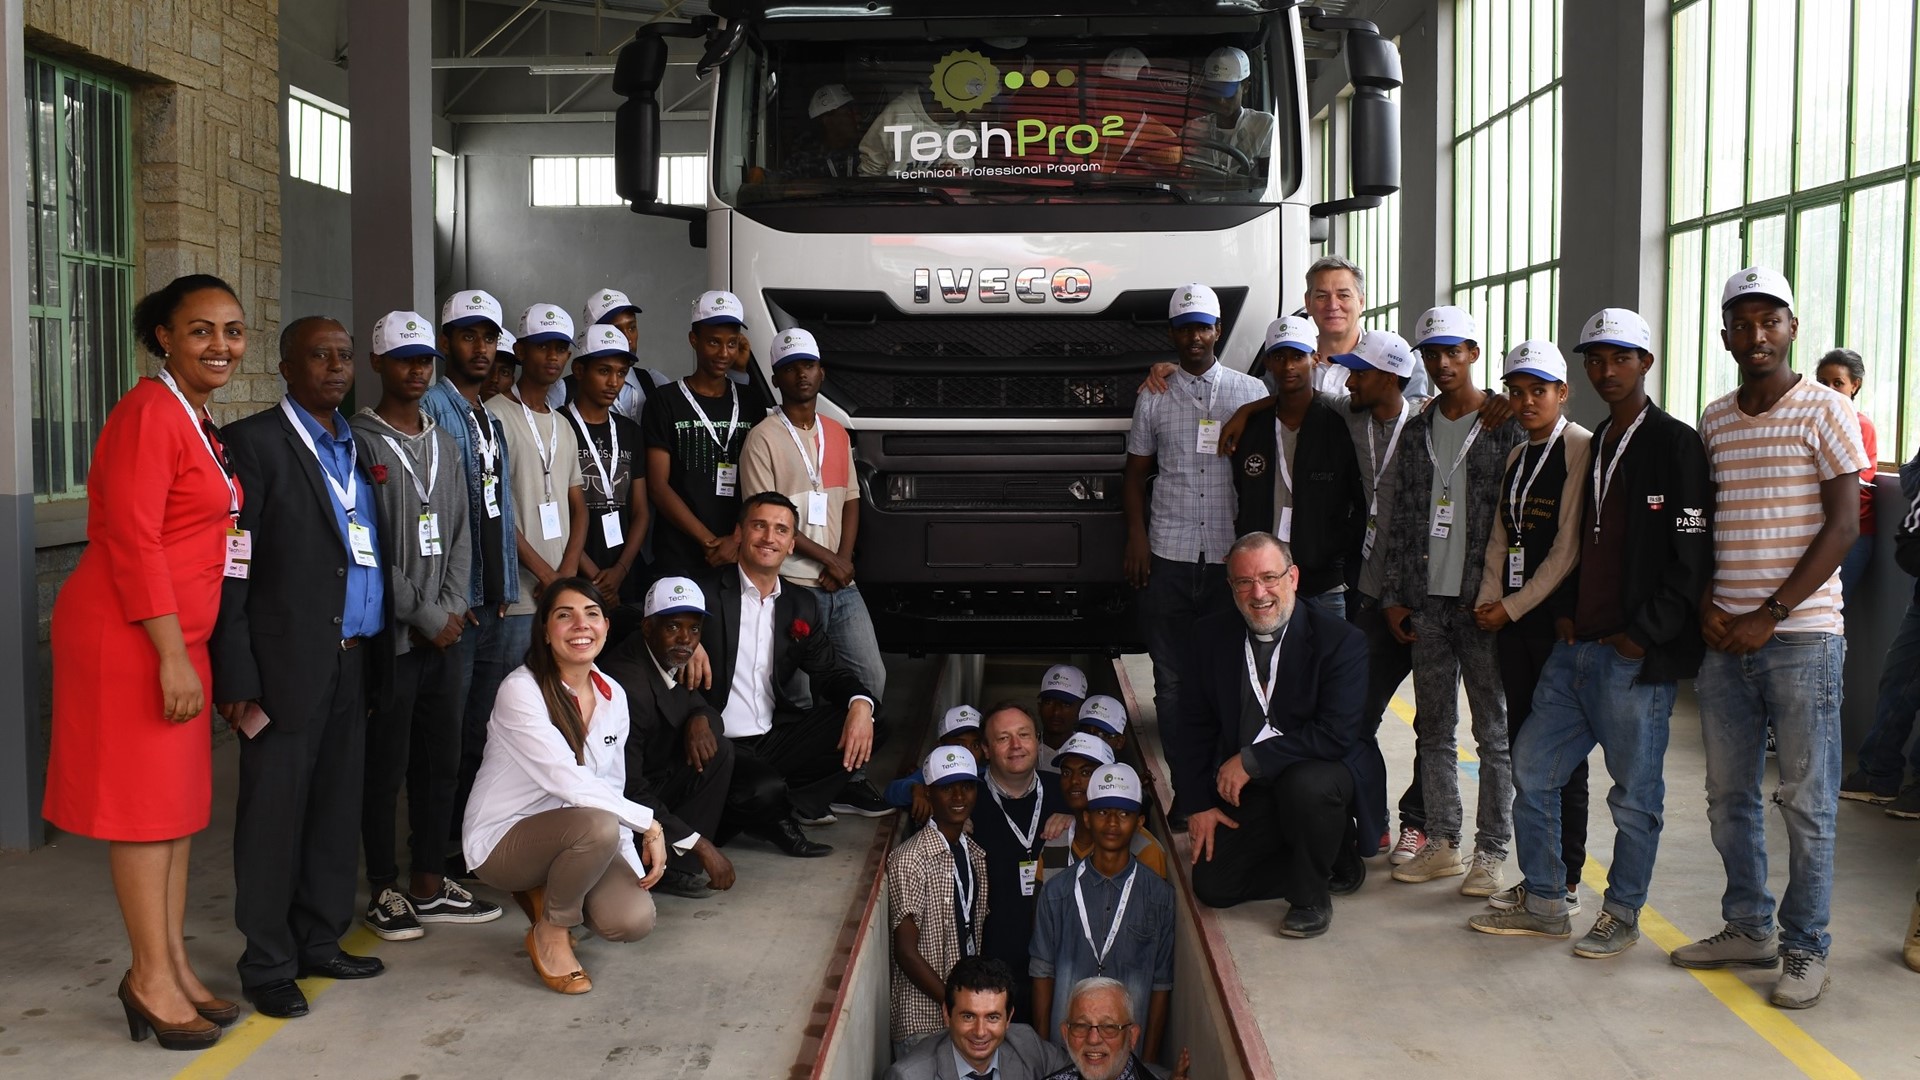 TechPro2 students and representatives from CNH Industrial, IVECO, IVECO AMCE and Fondazione Opera Don Bosco